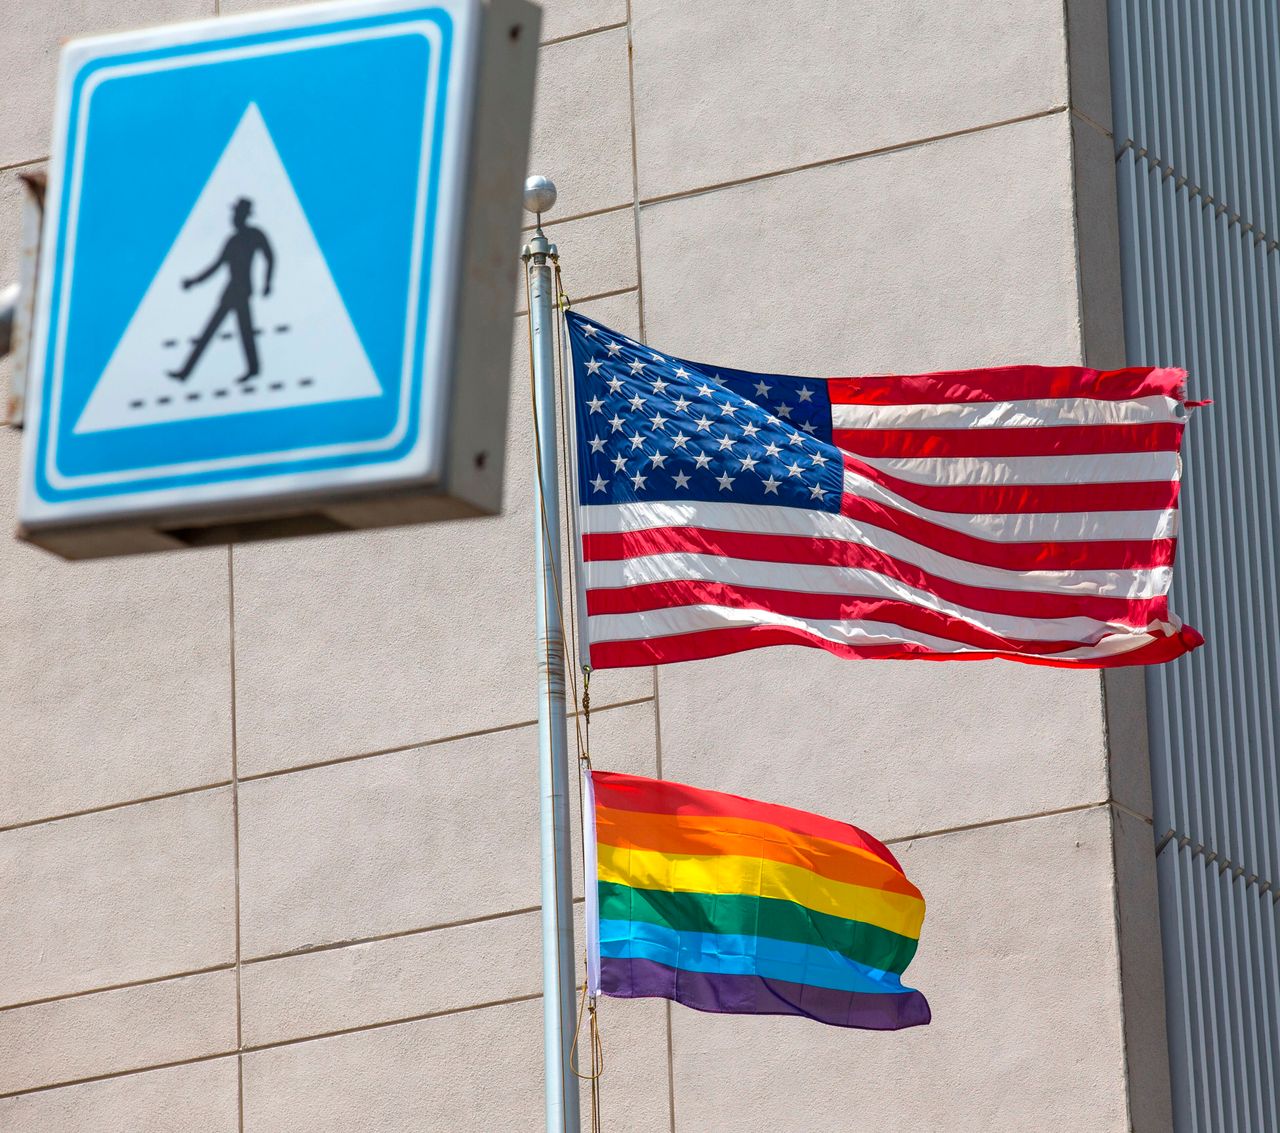 President Donald Trump barred U.S. embassies from flying LGBTQ+ pride flags. President Joe Biden rescinded the policy in April.